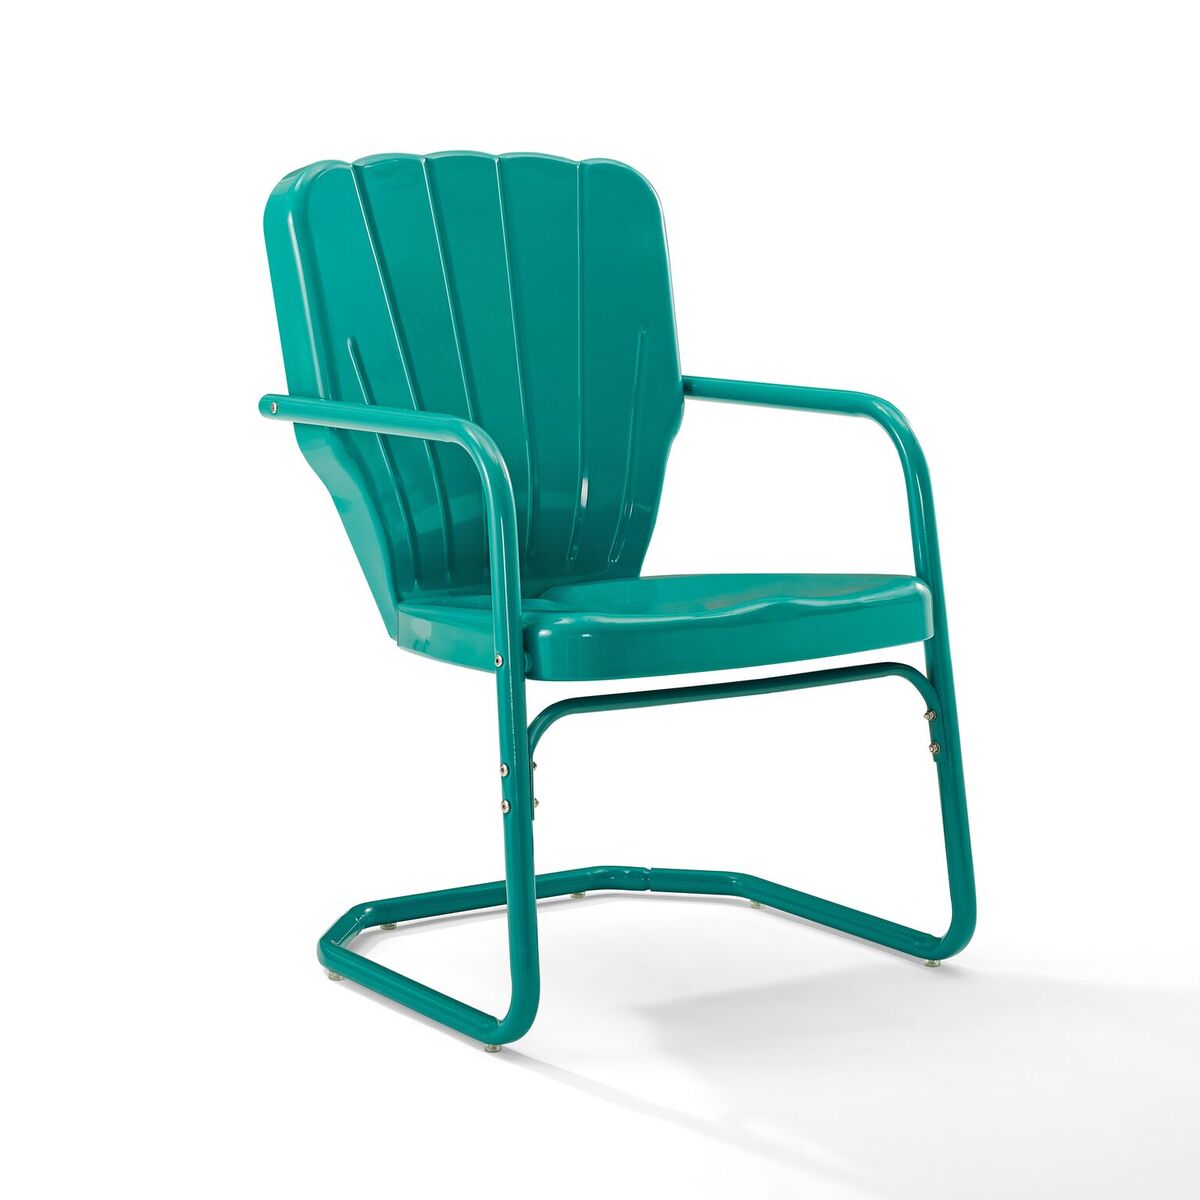 Picture of Crosley Furniture CO1031-TU Ridgeland Metal Chair, Turquoise Gloss - Set of 2, 34.25 x 19.5 x 23.25 in.